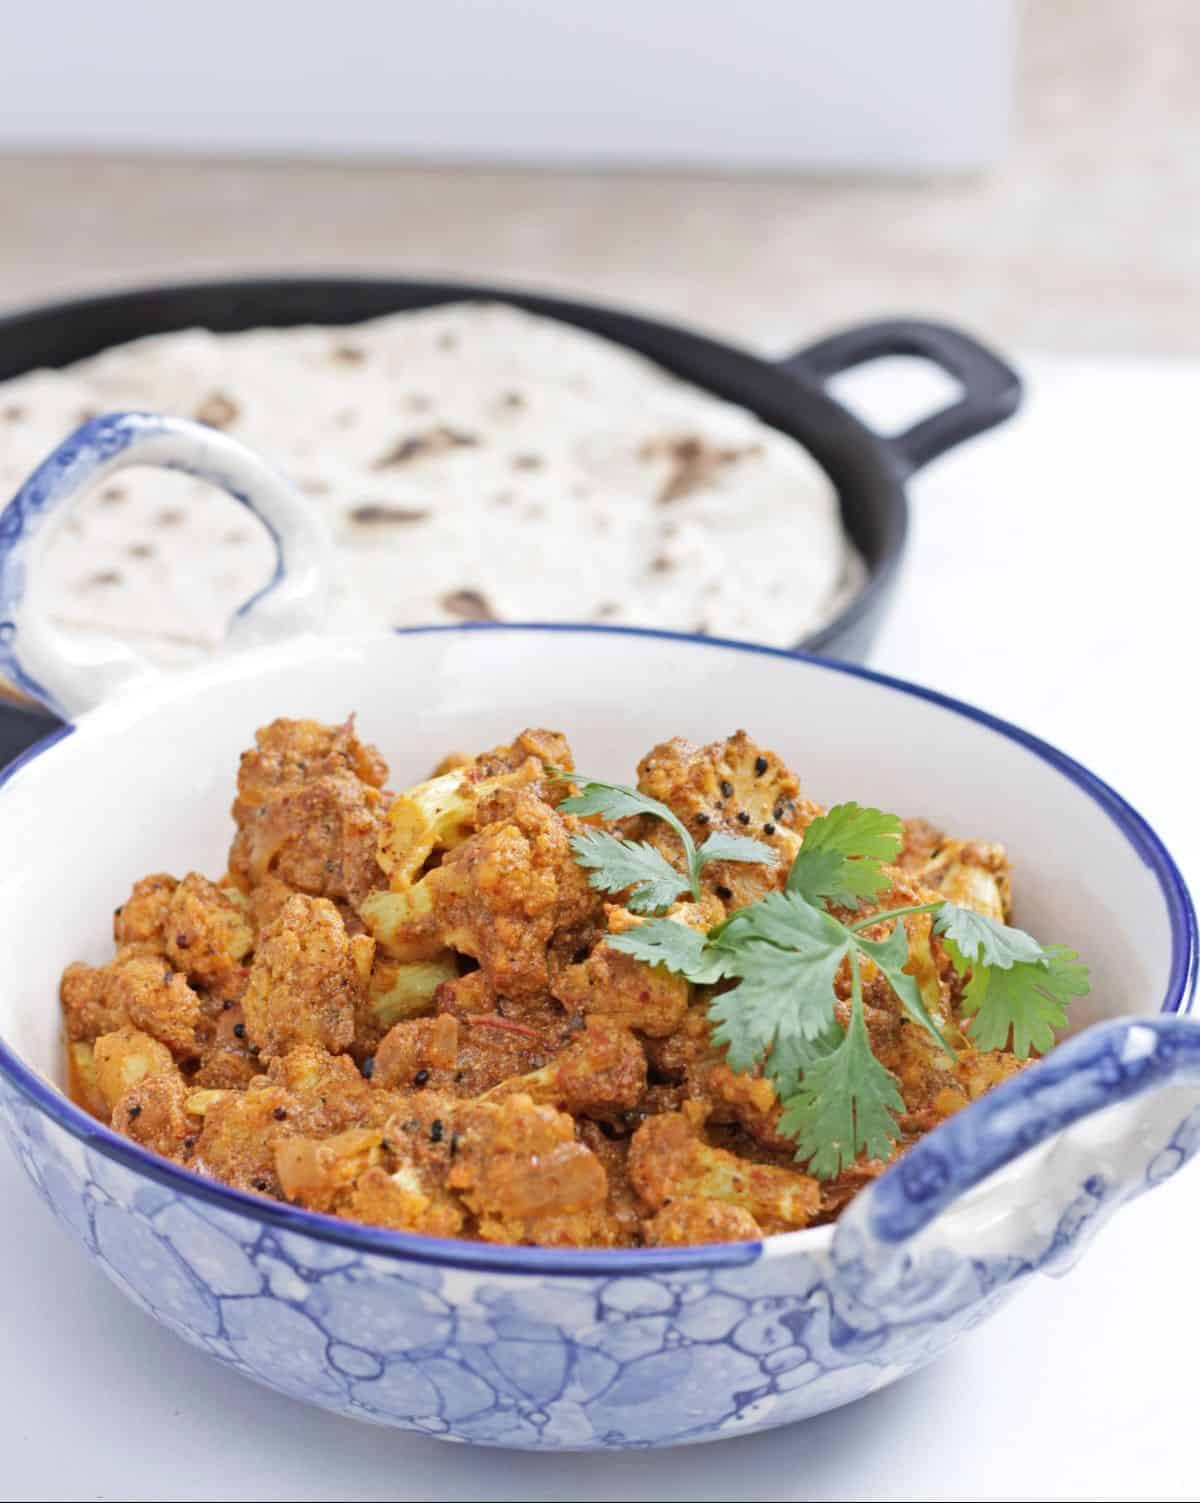 Cauliflower curry in a blue bowl garnished with cilantro and roti in the background